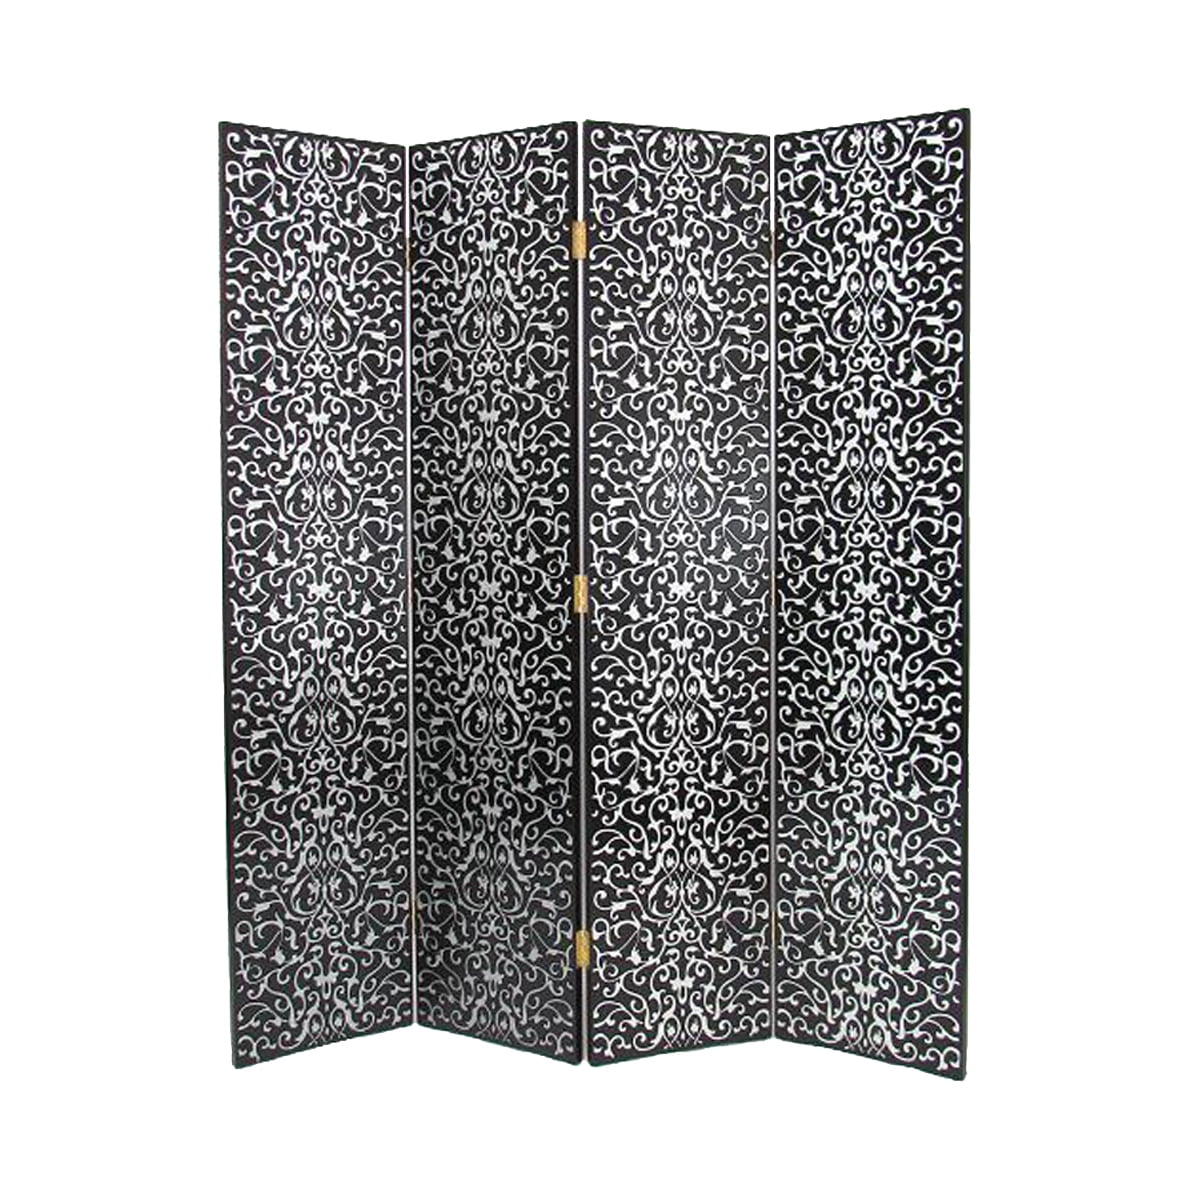 Picture of Benjara BM213512 Wooden 4 Panel Room Divider with Scrolling Motifs - Black & Silver